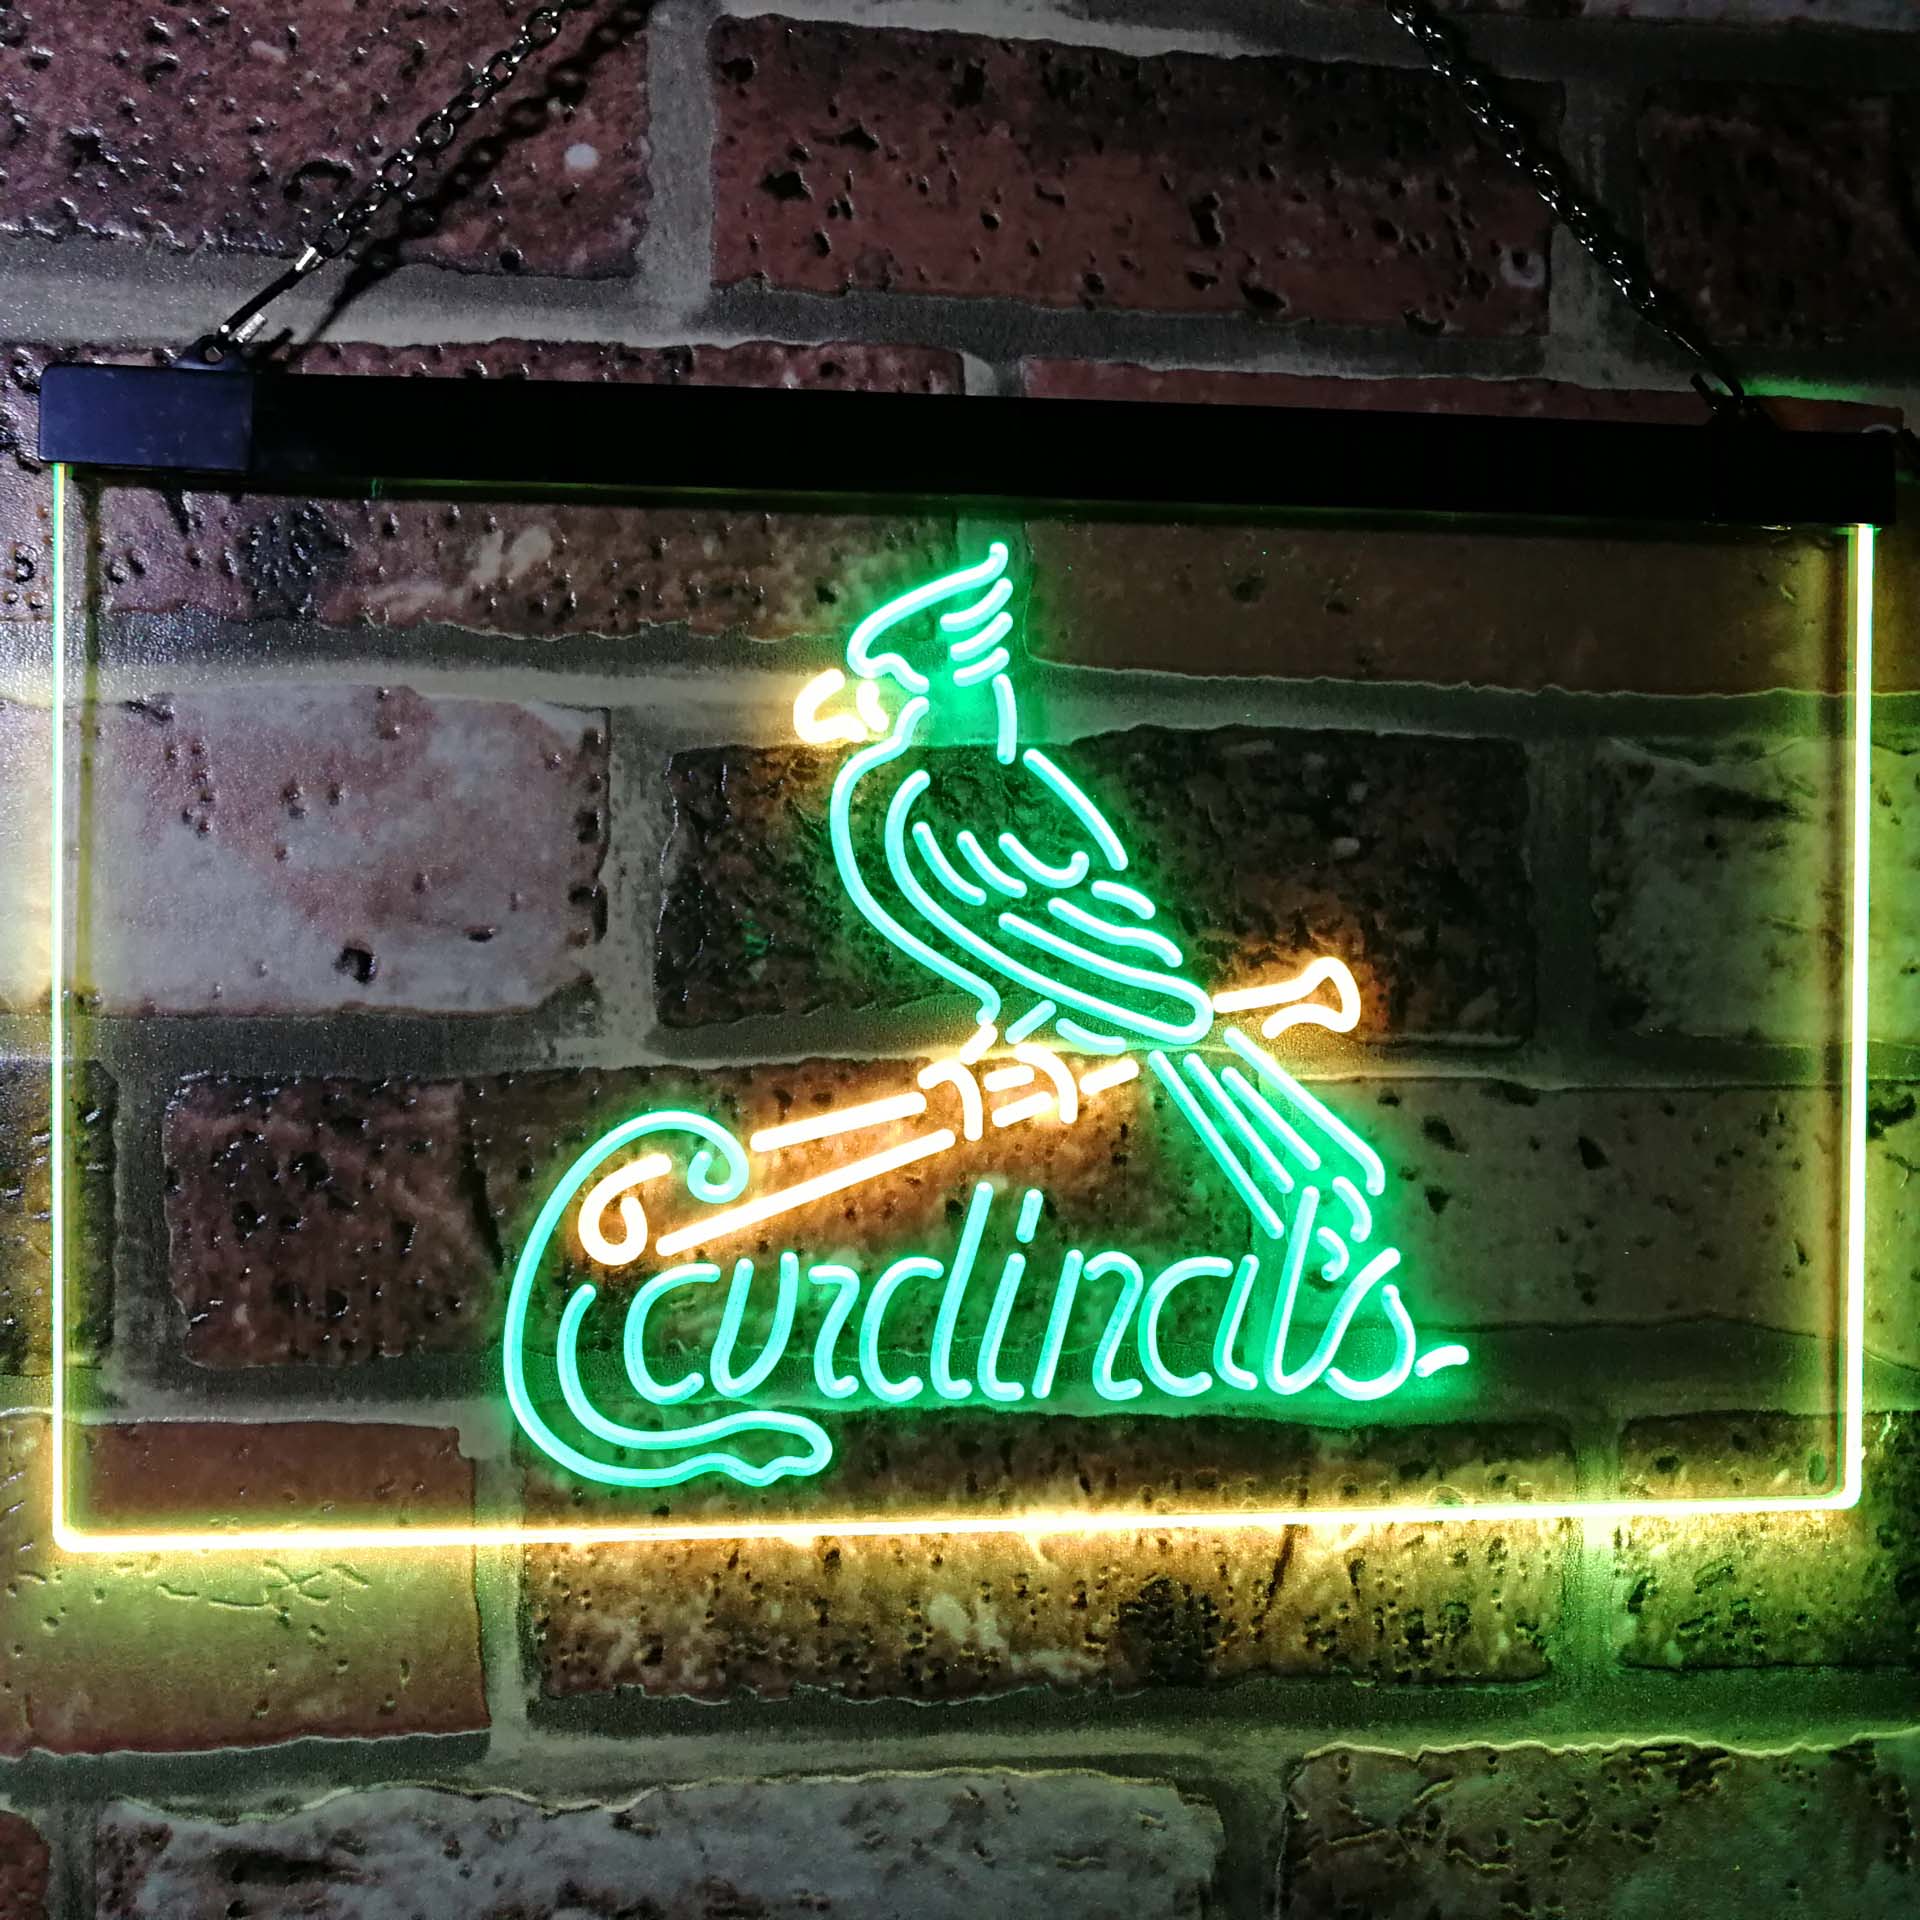 Louisville Cardinals The Ville Neon-Like LED Sign